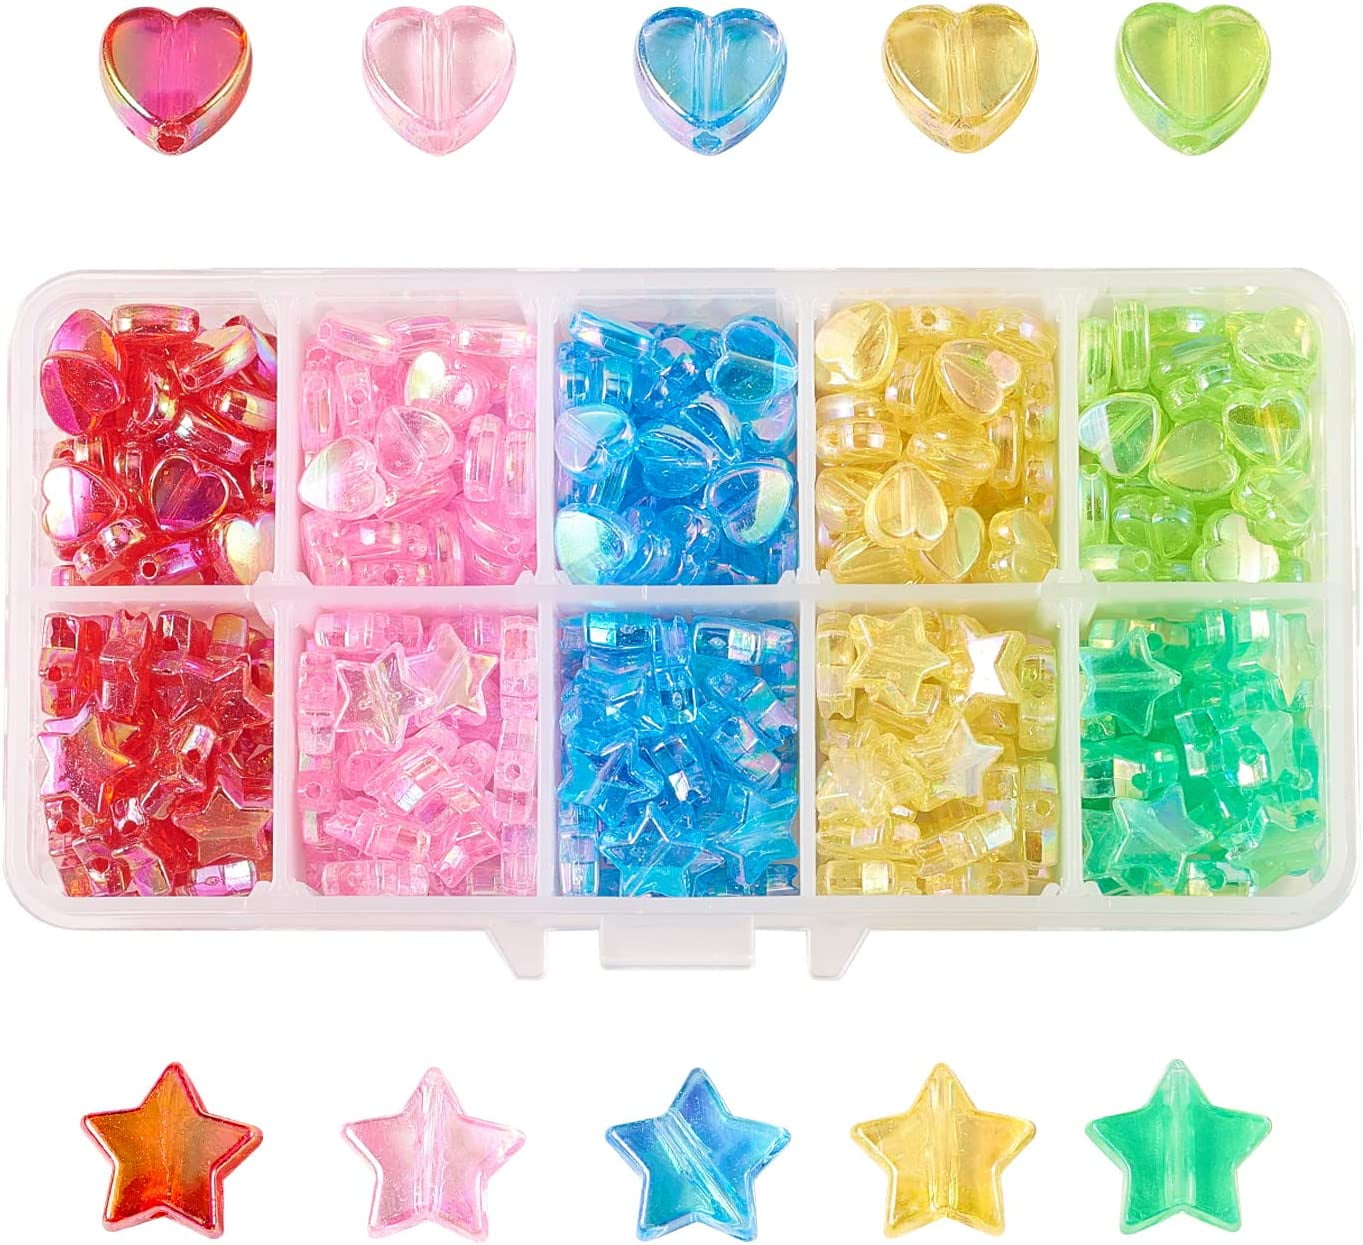 Ipotkitt 630pcs 18 Colors Acrylic Charming Beads Rainbow Round Star AB  Beads Charming Heart Beads for Jewelry Making Bracelets Crafts 